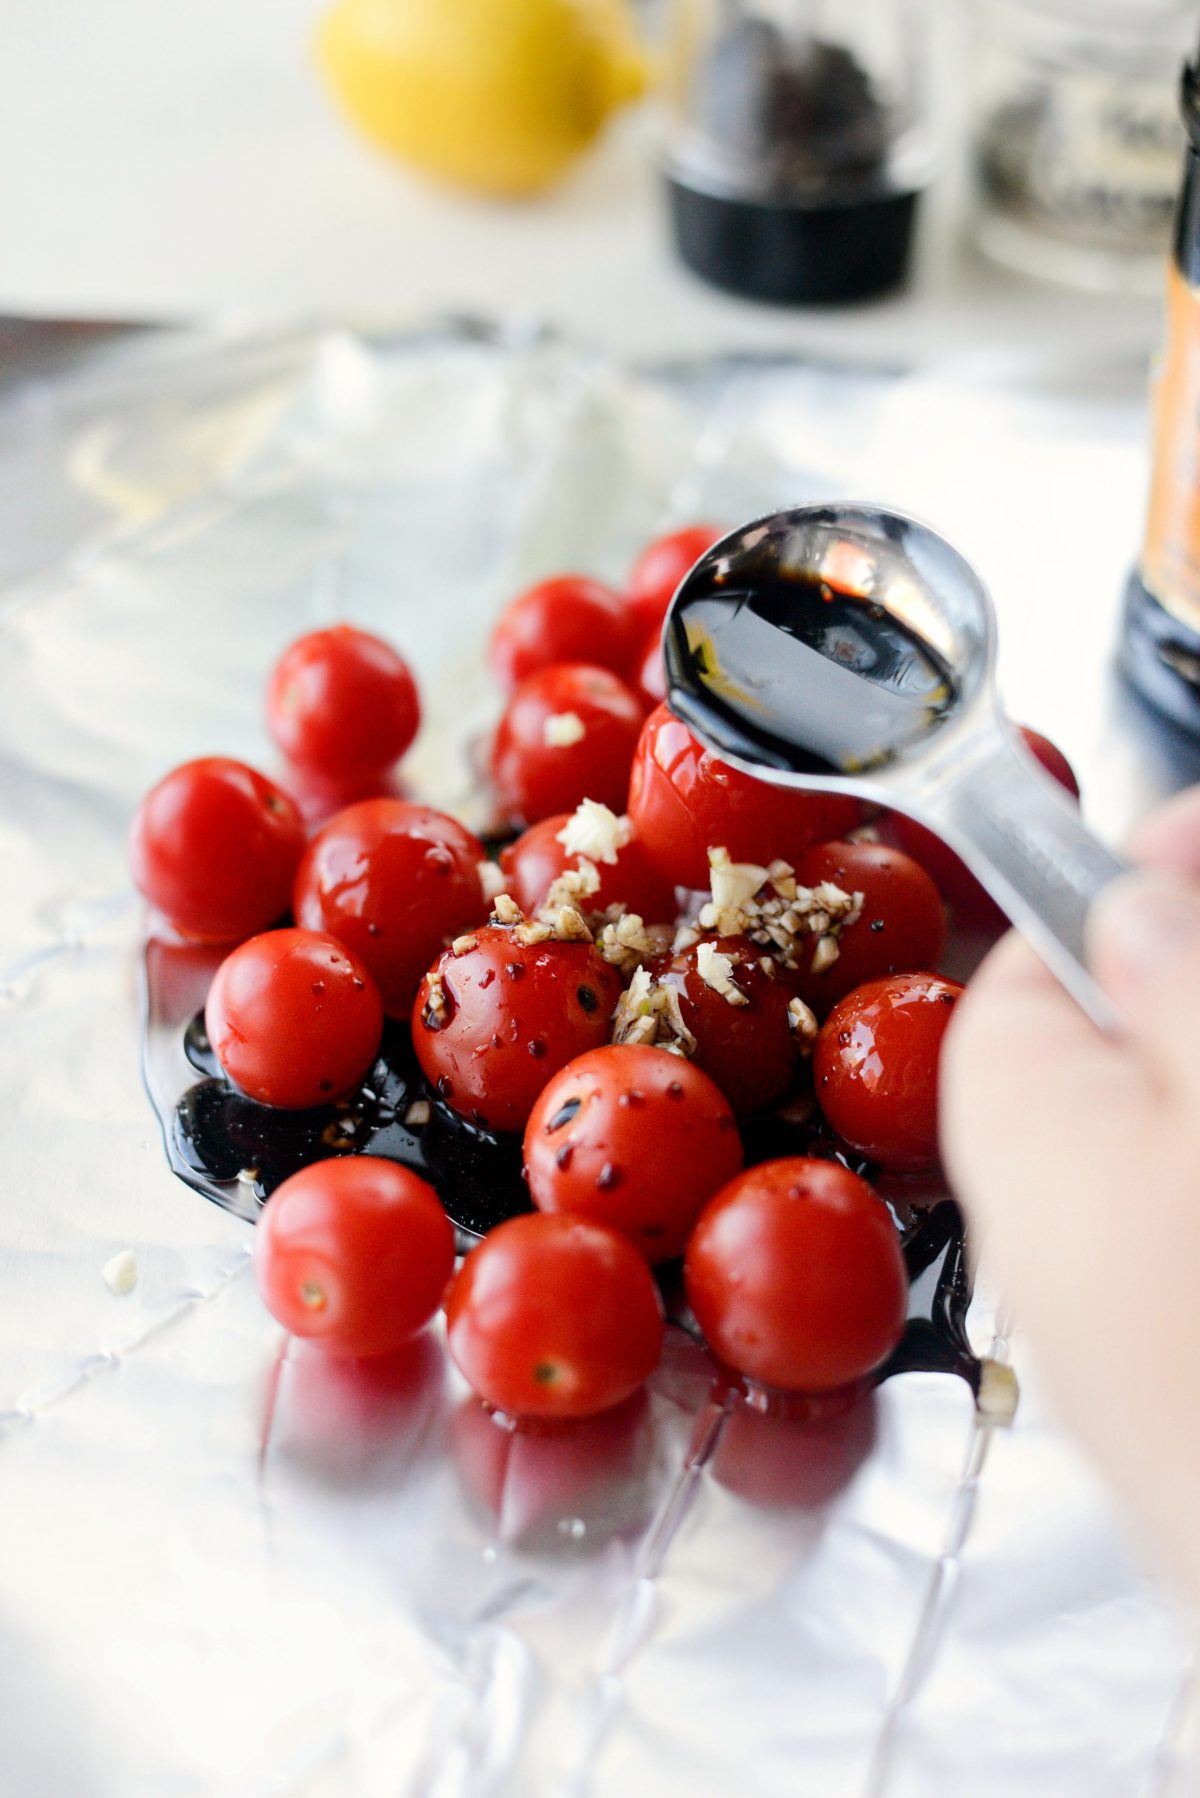 making tomato foil pack with tomatoes, garlic and balsamic vinegar